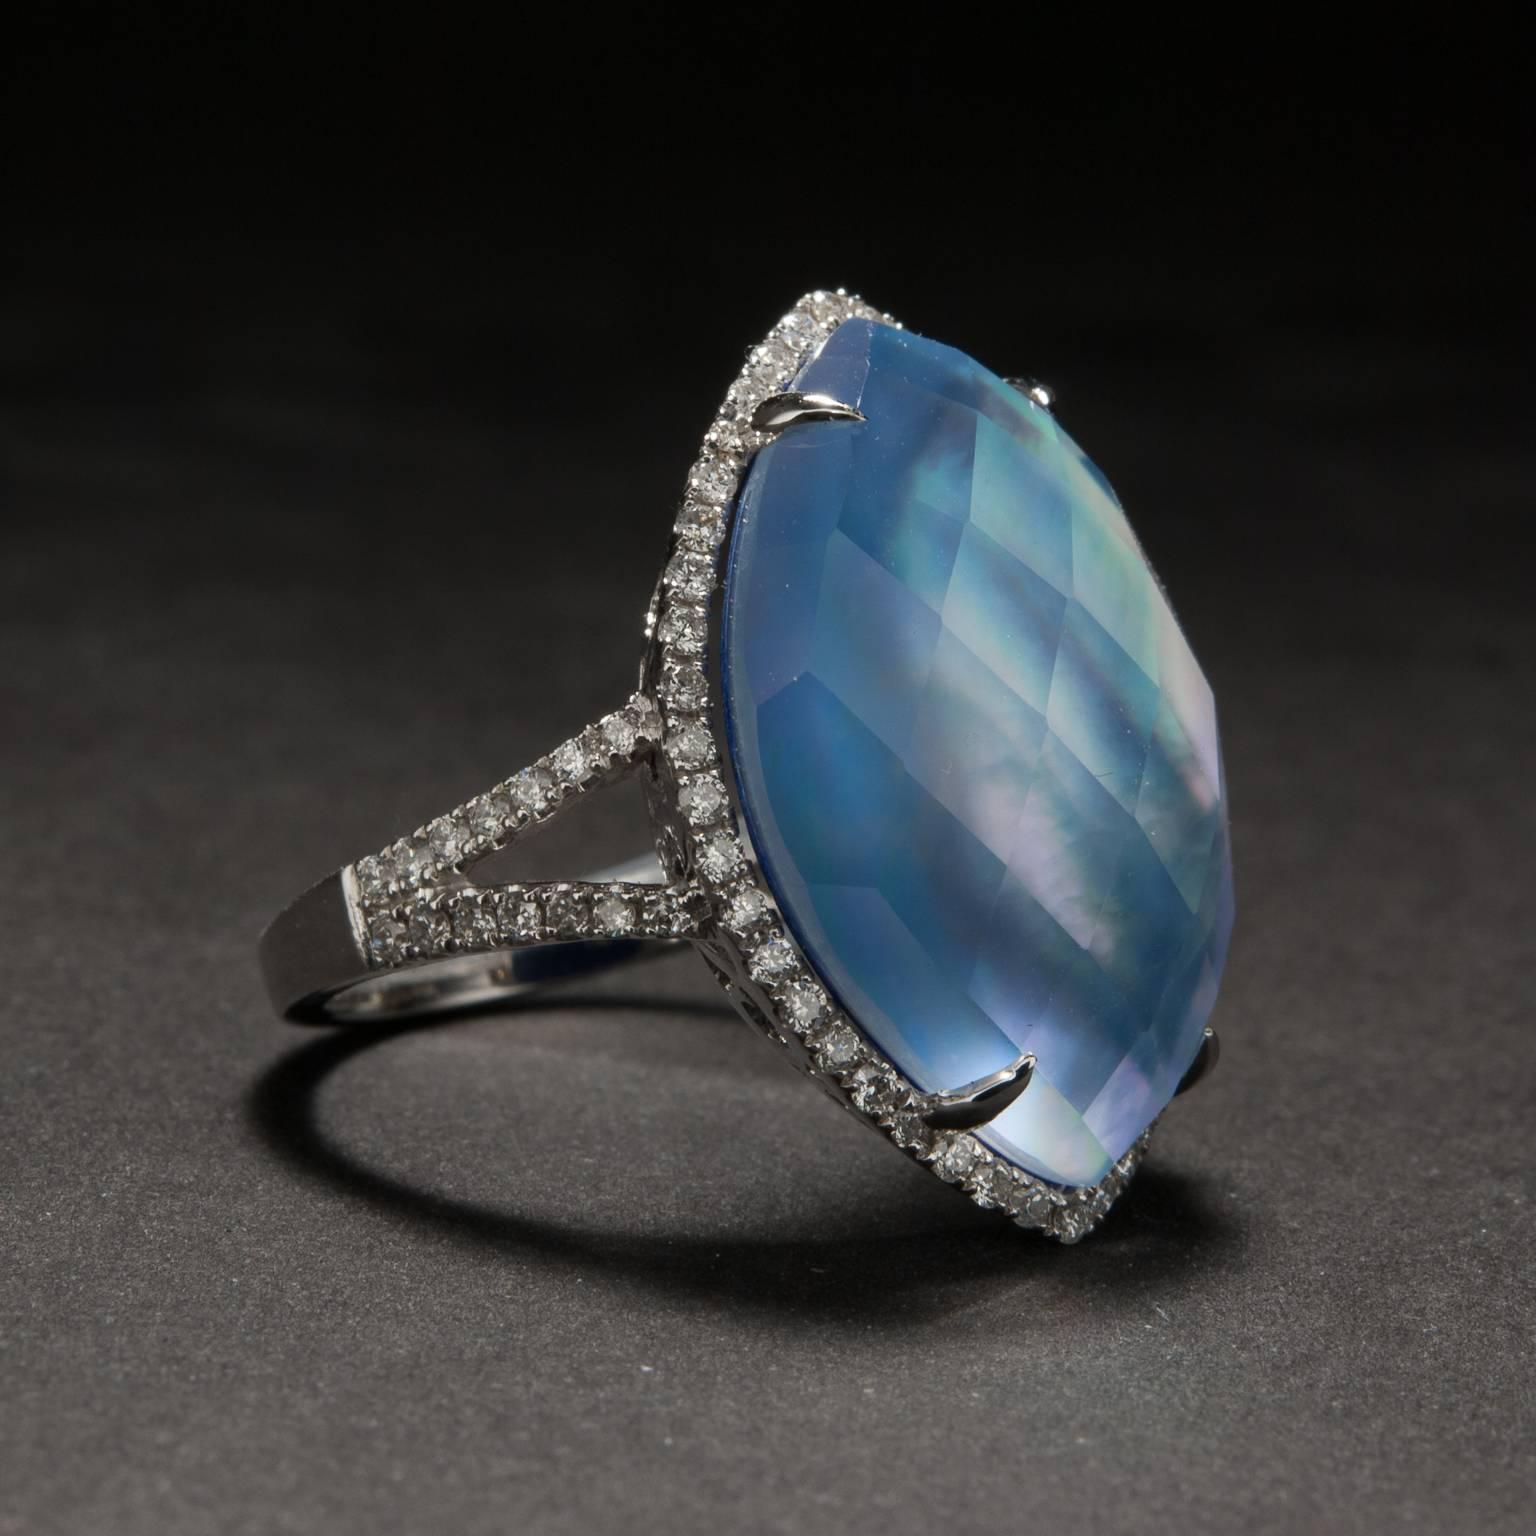 Contemporary Lapis Lazuli, Mother-of-Pearl and White Topaz Triplet Ring